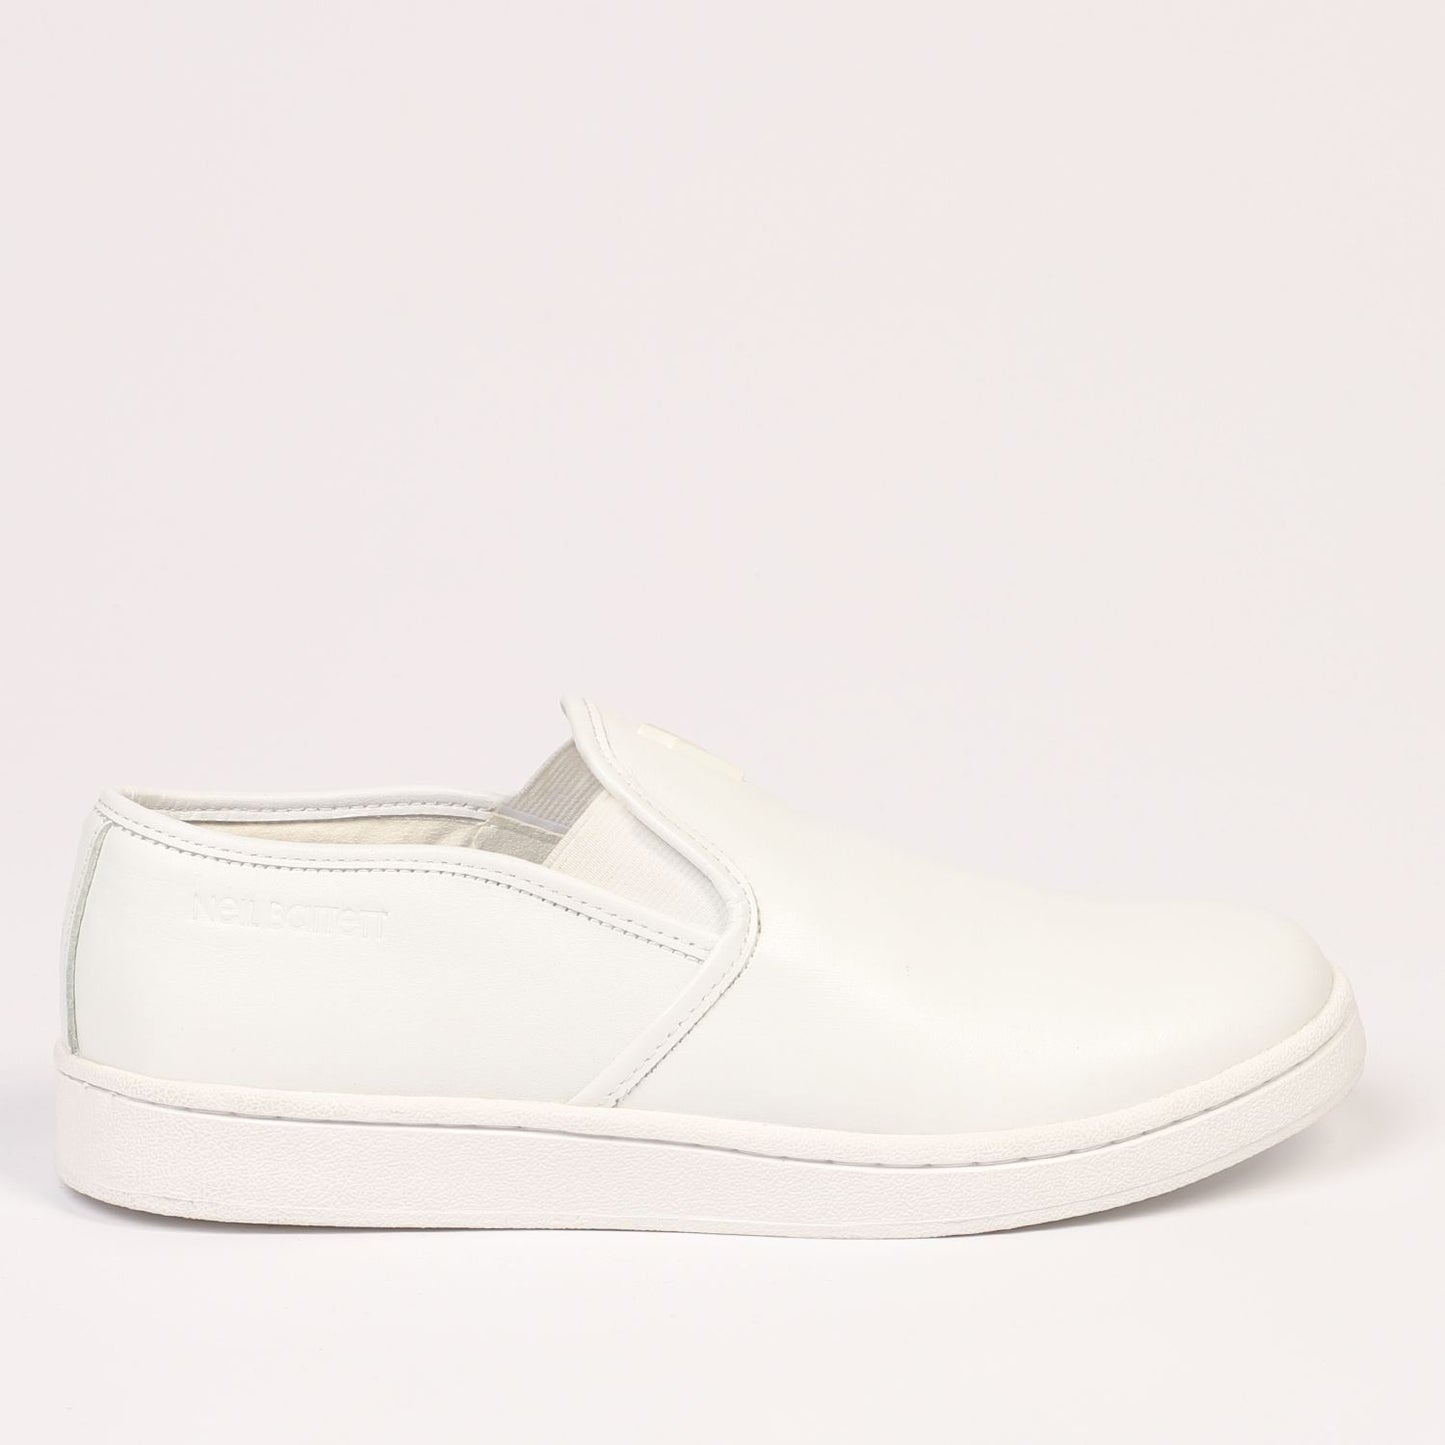 Chic White Slip-On Sneakers with Logo Detail